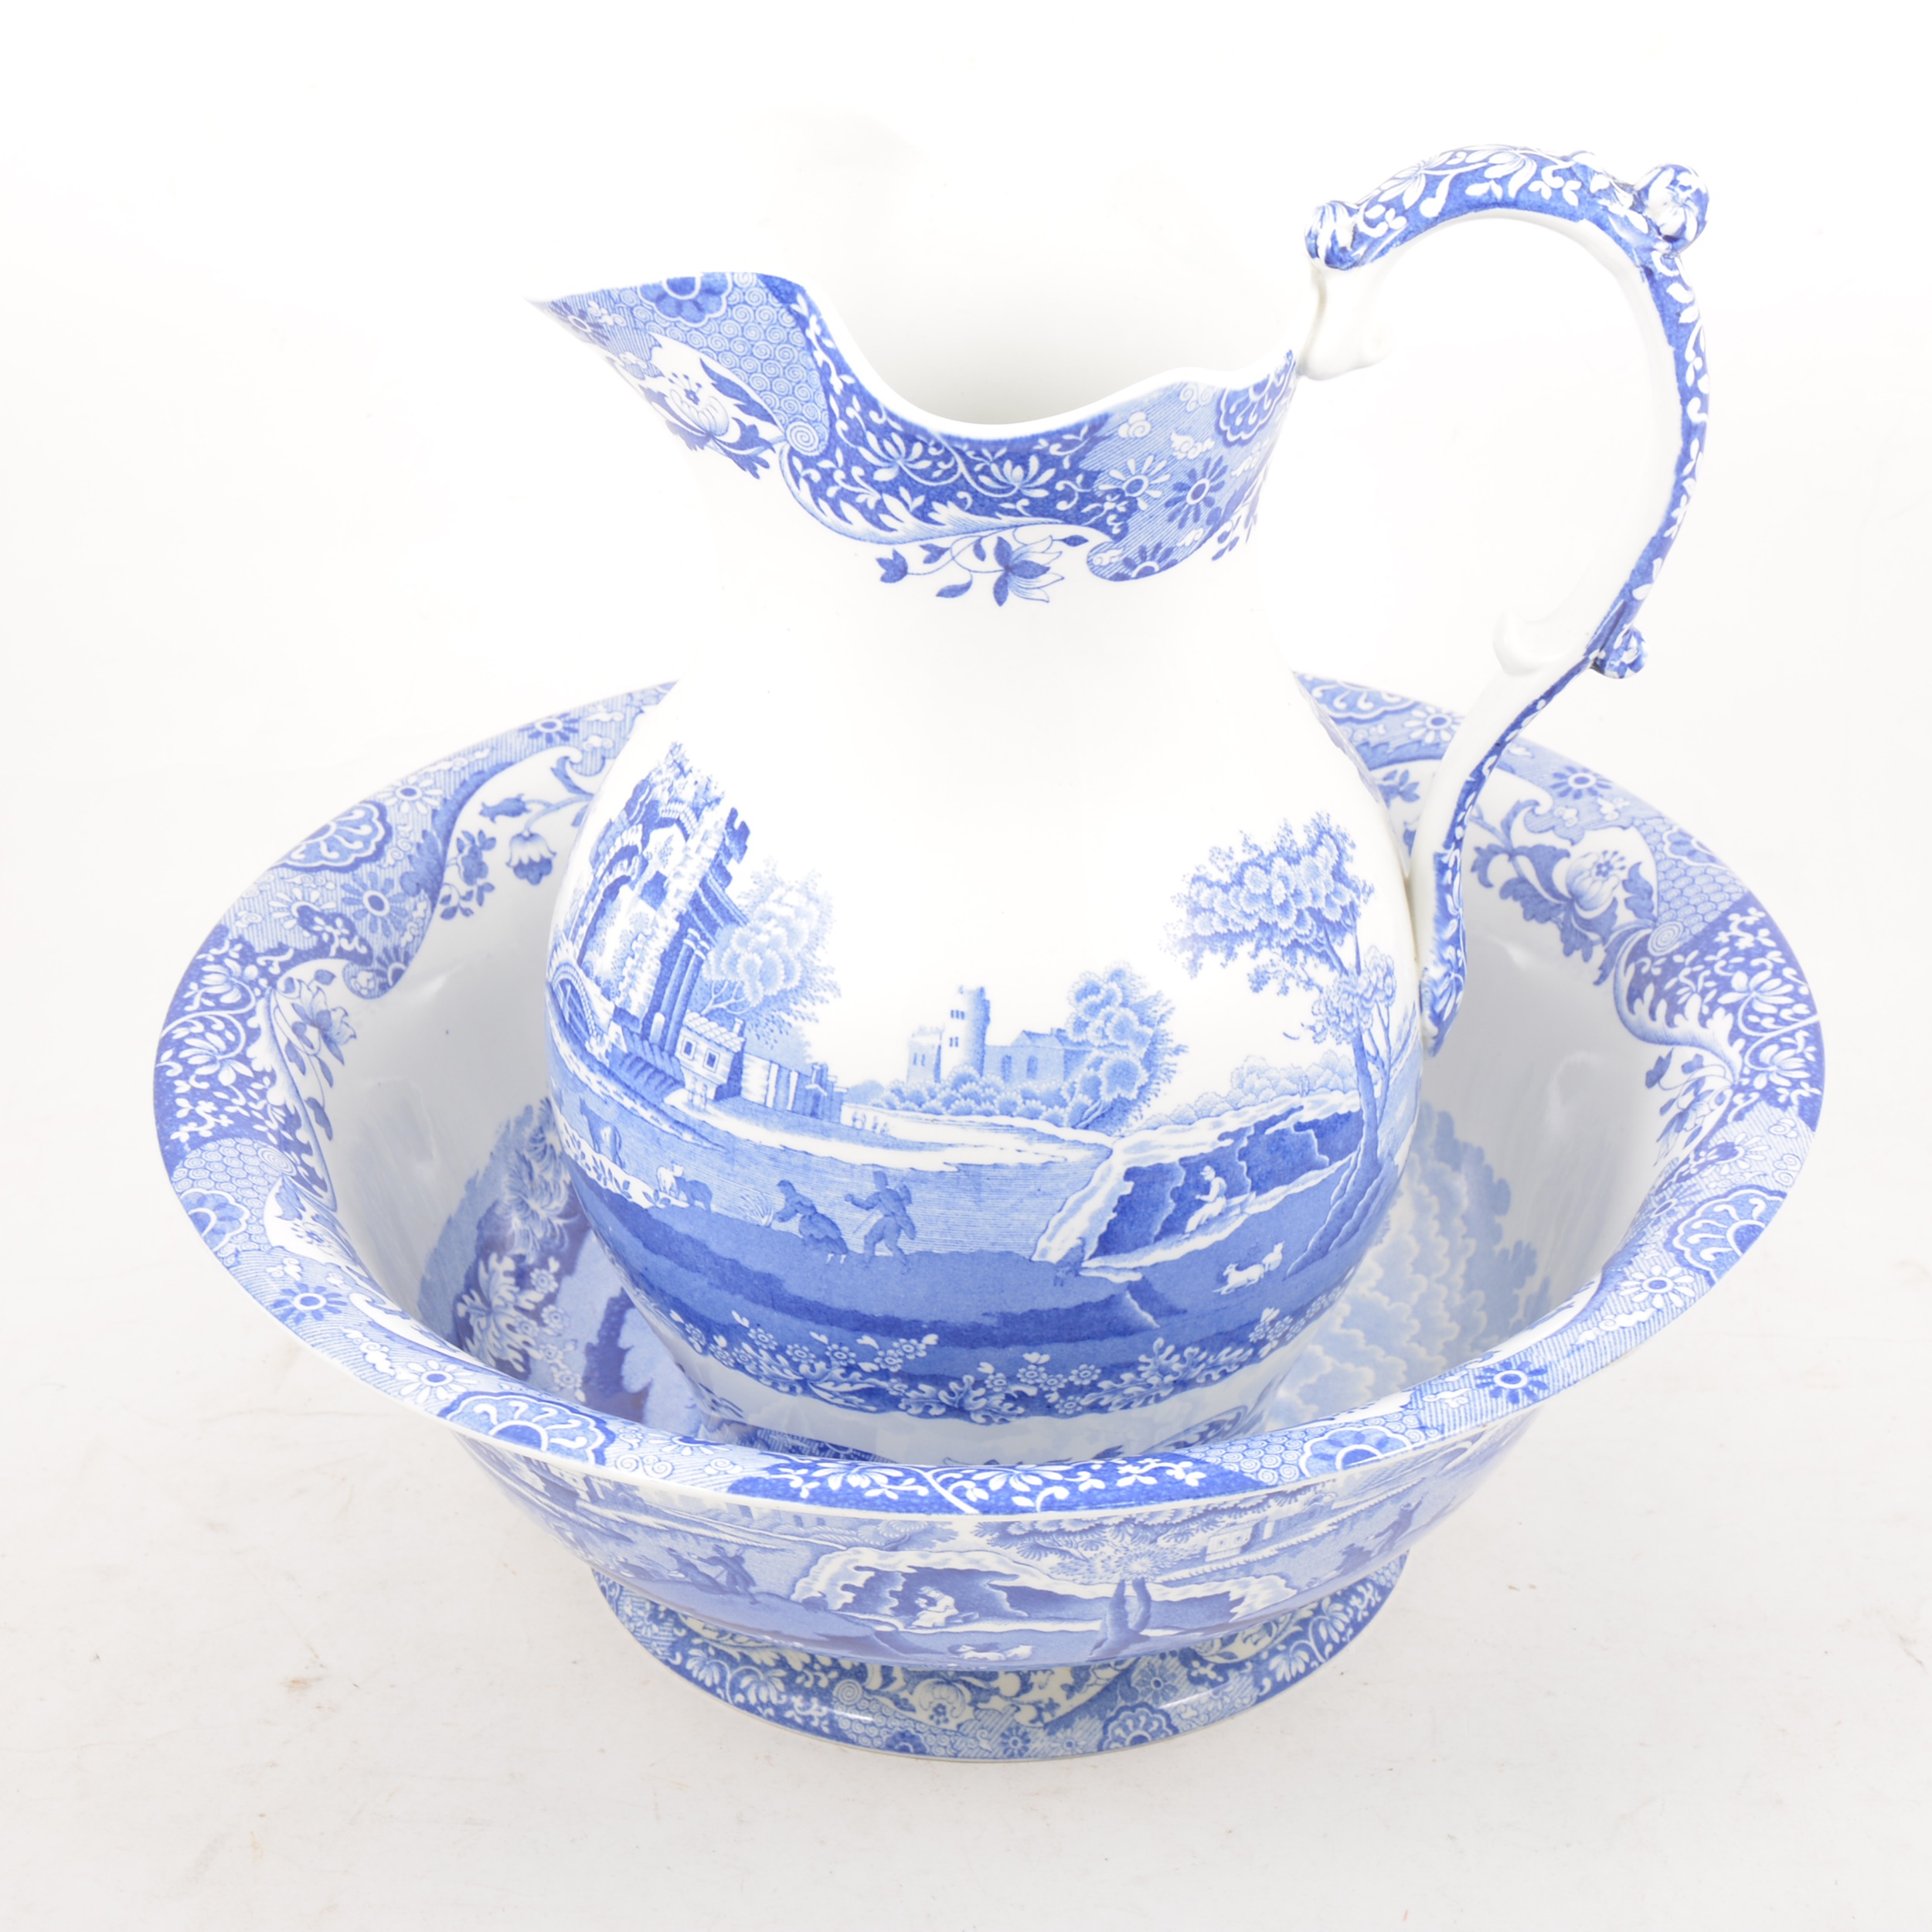 A large Spode 'Italian' pattern blue and white jug and bowl.